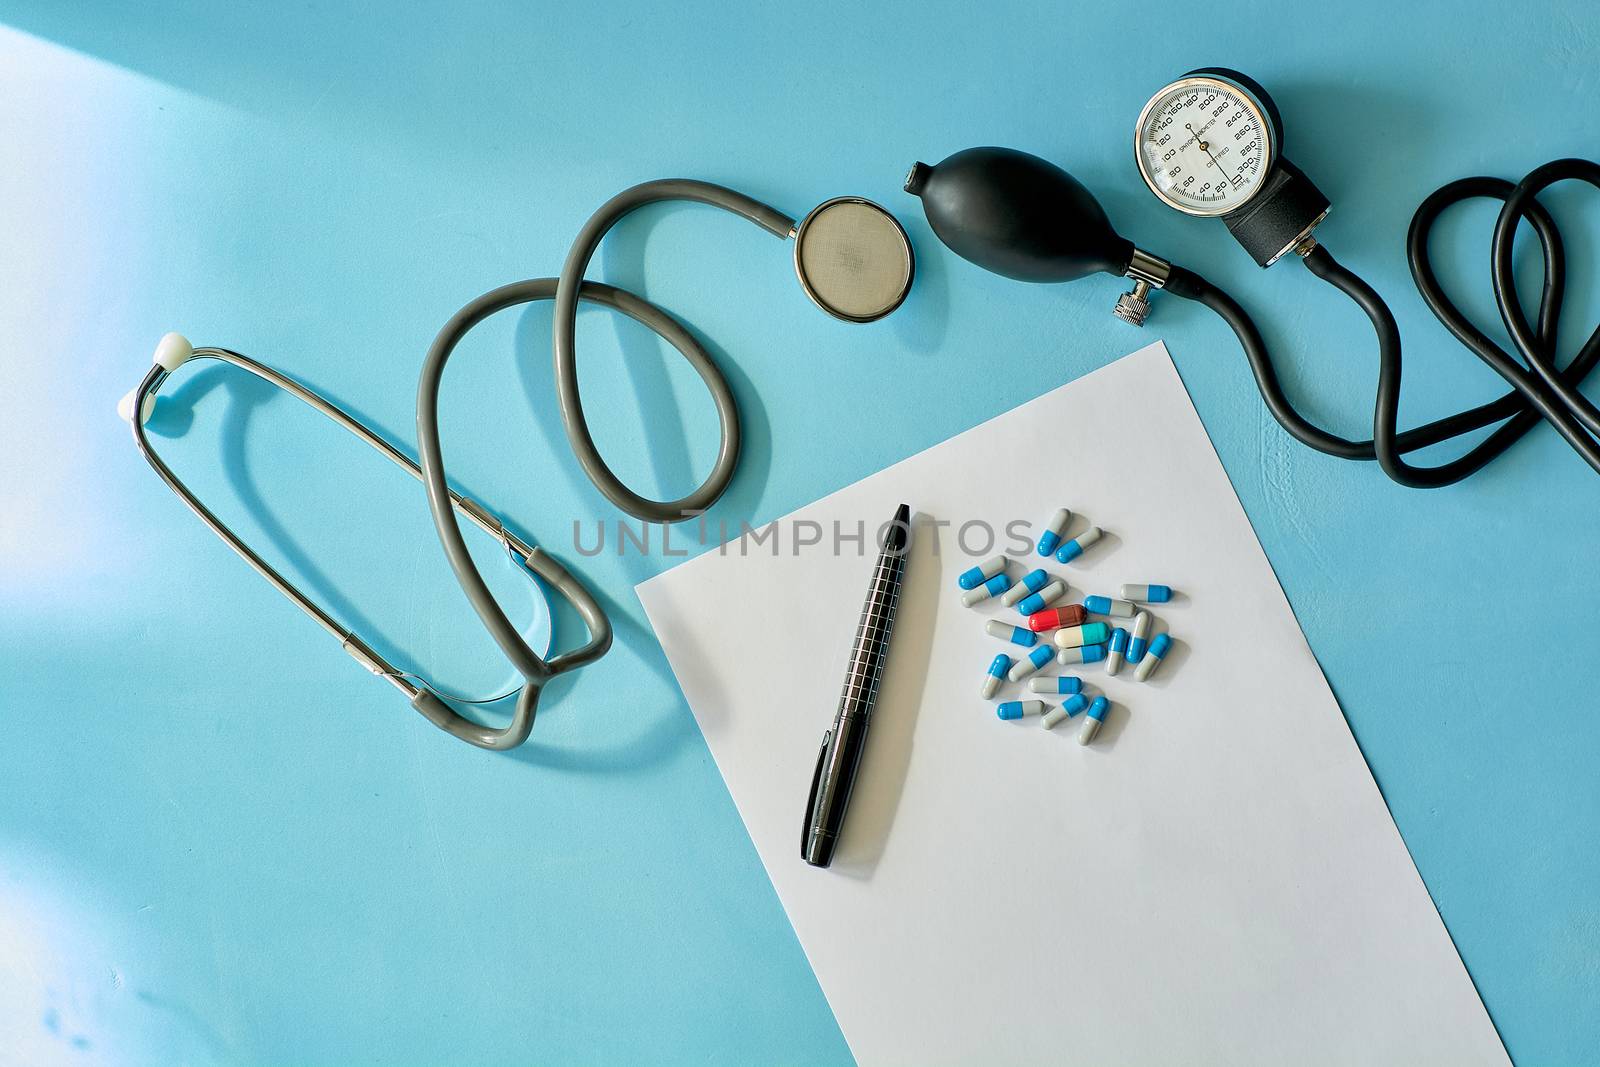 White sheet paper with black pen and colored different pills, capsules, phonendoscope stethoscope, sphygmomanometer on blue background with copy space for text. Medicine consept.